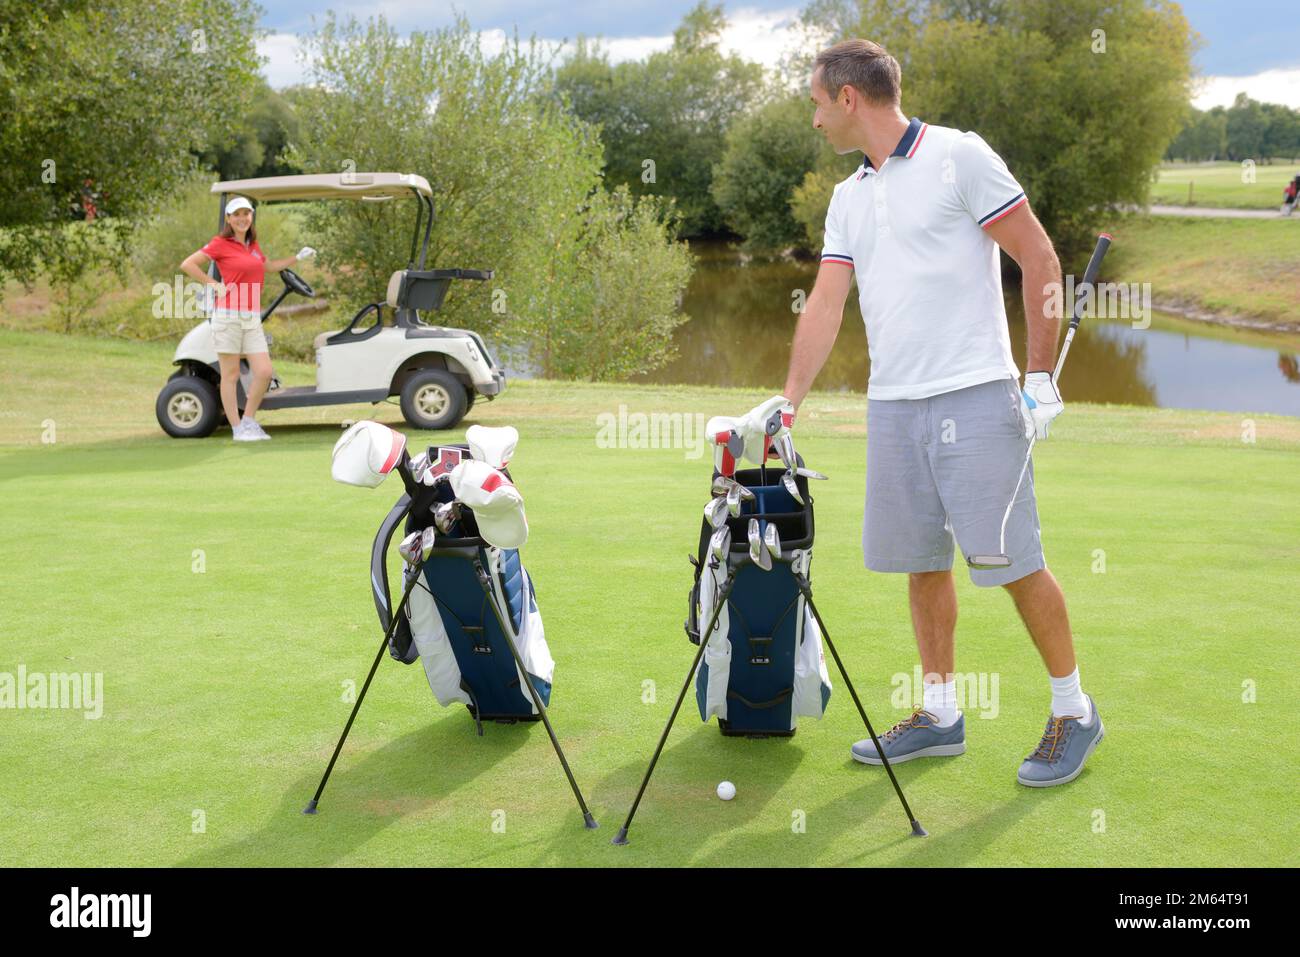 couple on golfing green with buggy and bags Stock Photo